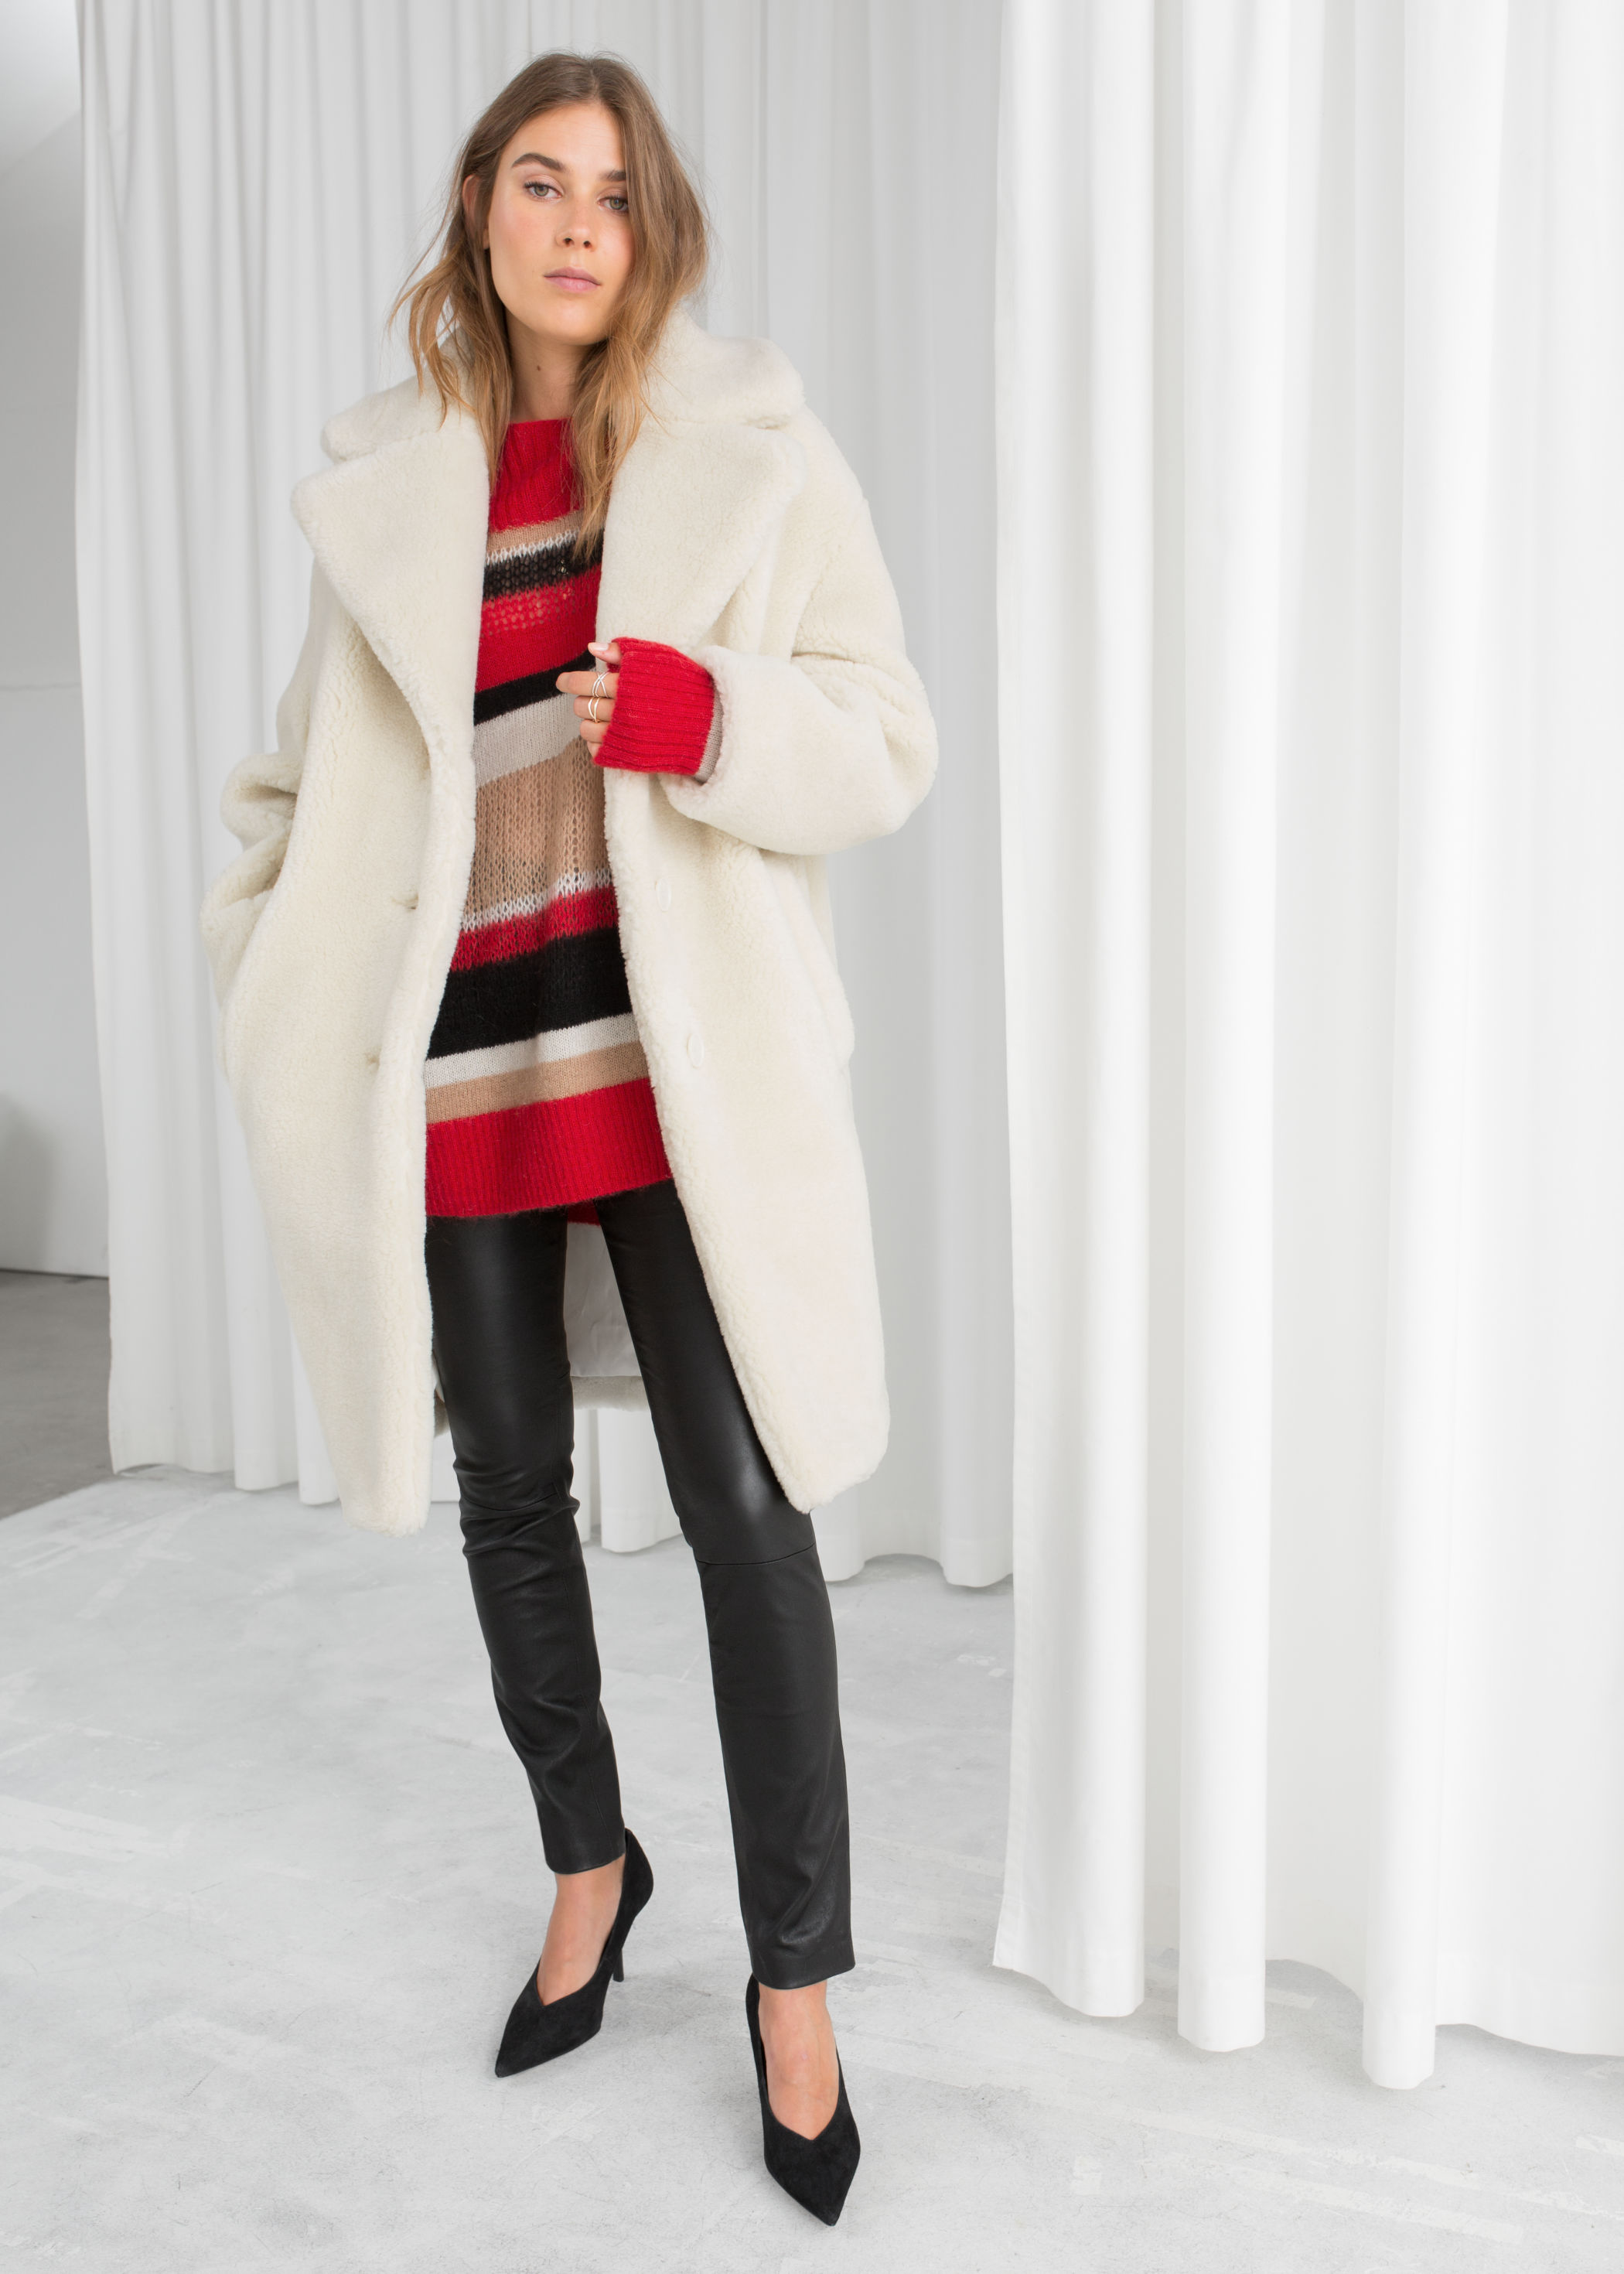 & Other Stories Faux Shearling Winter Coats: Fashion Forward Options You'll Love